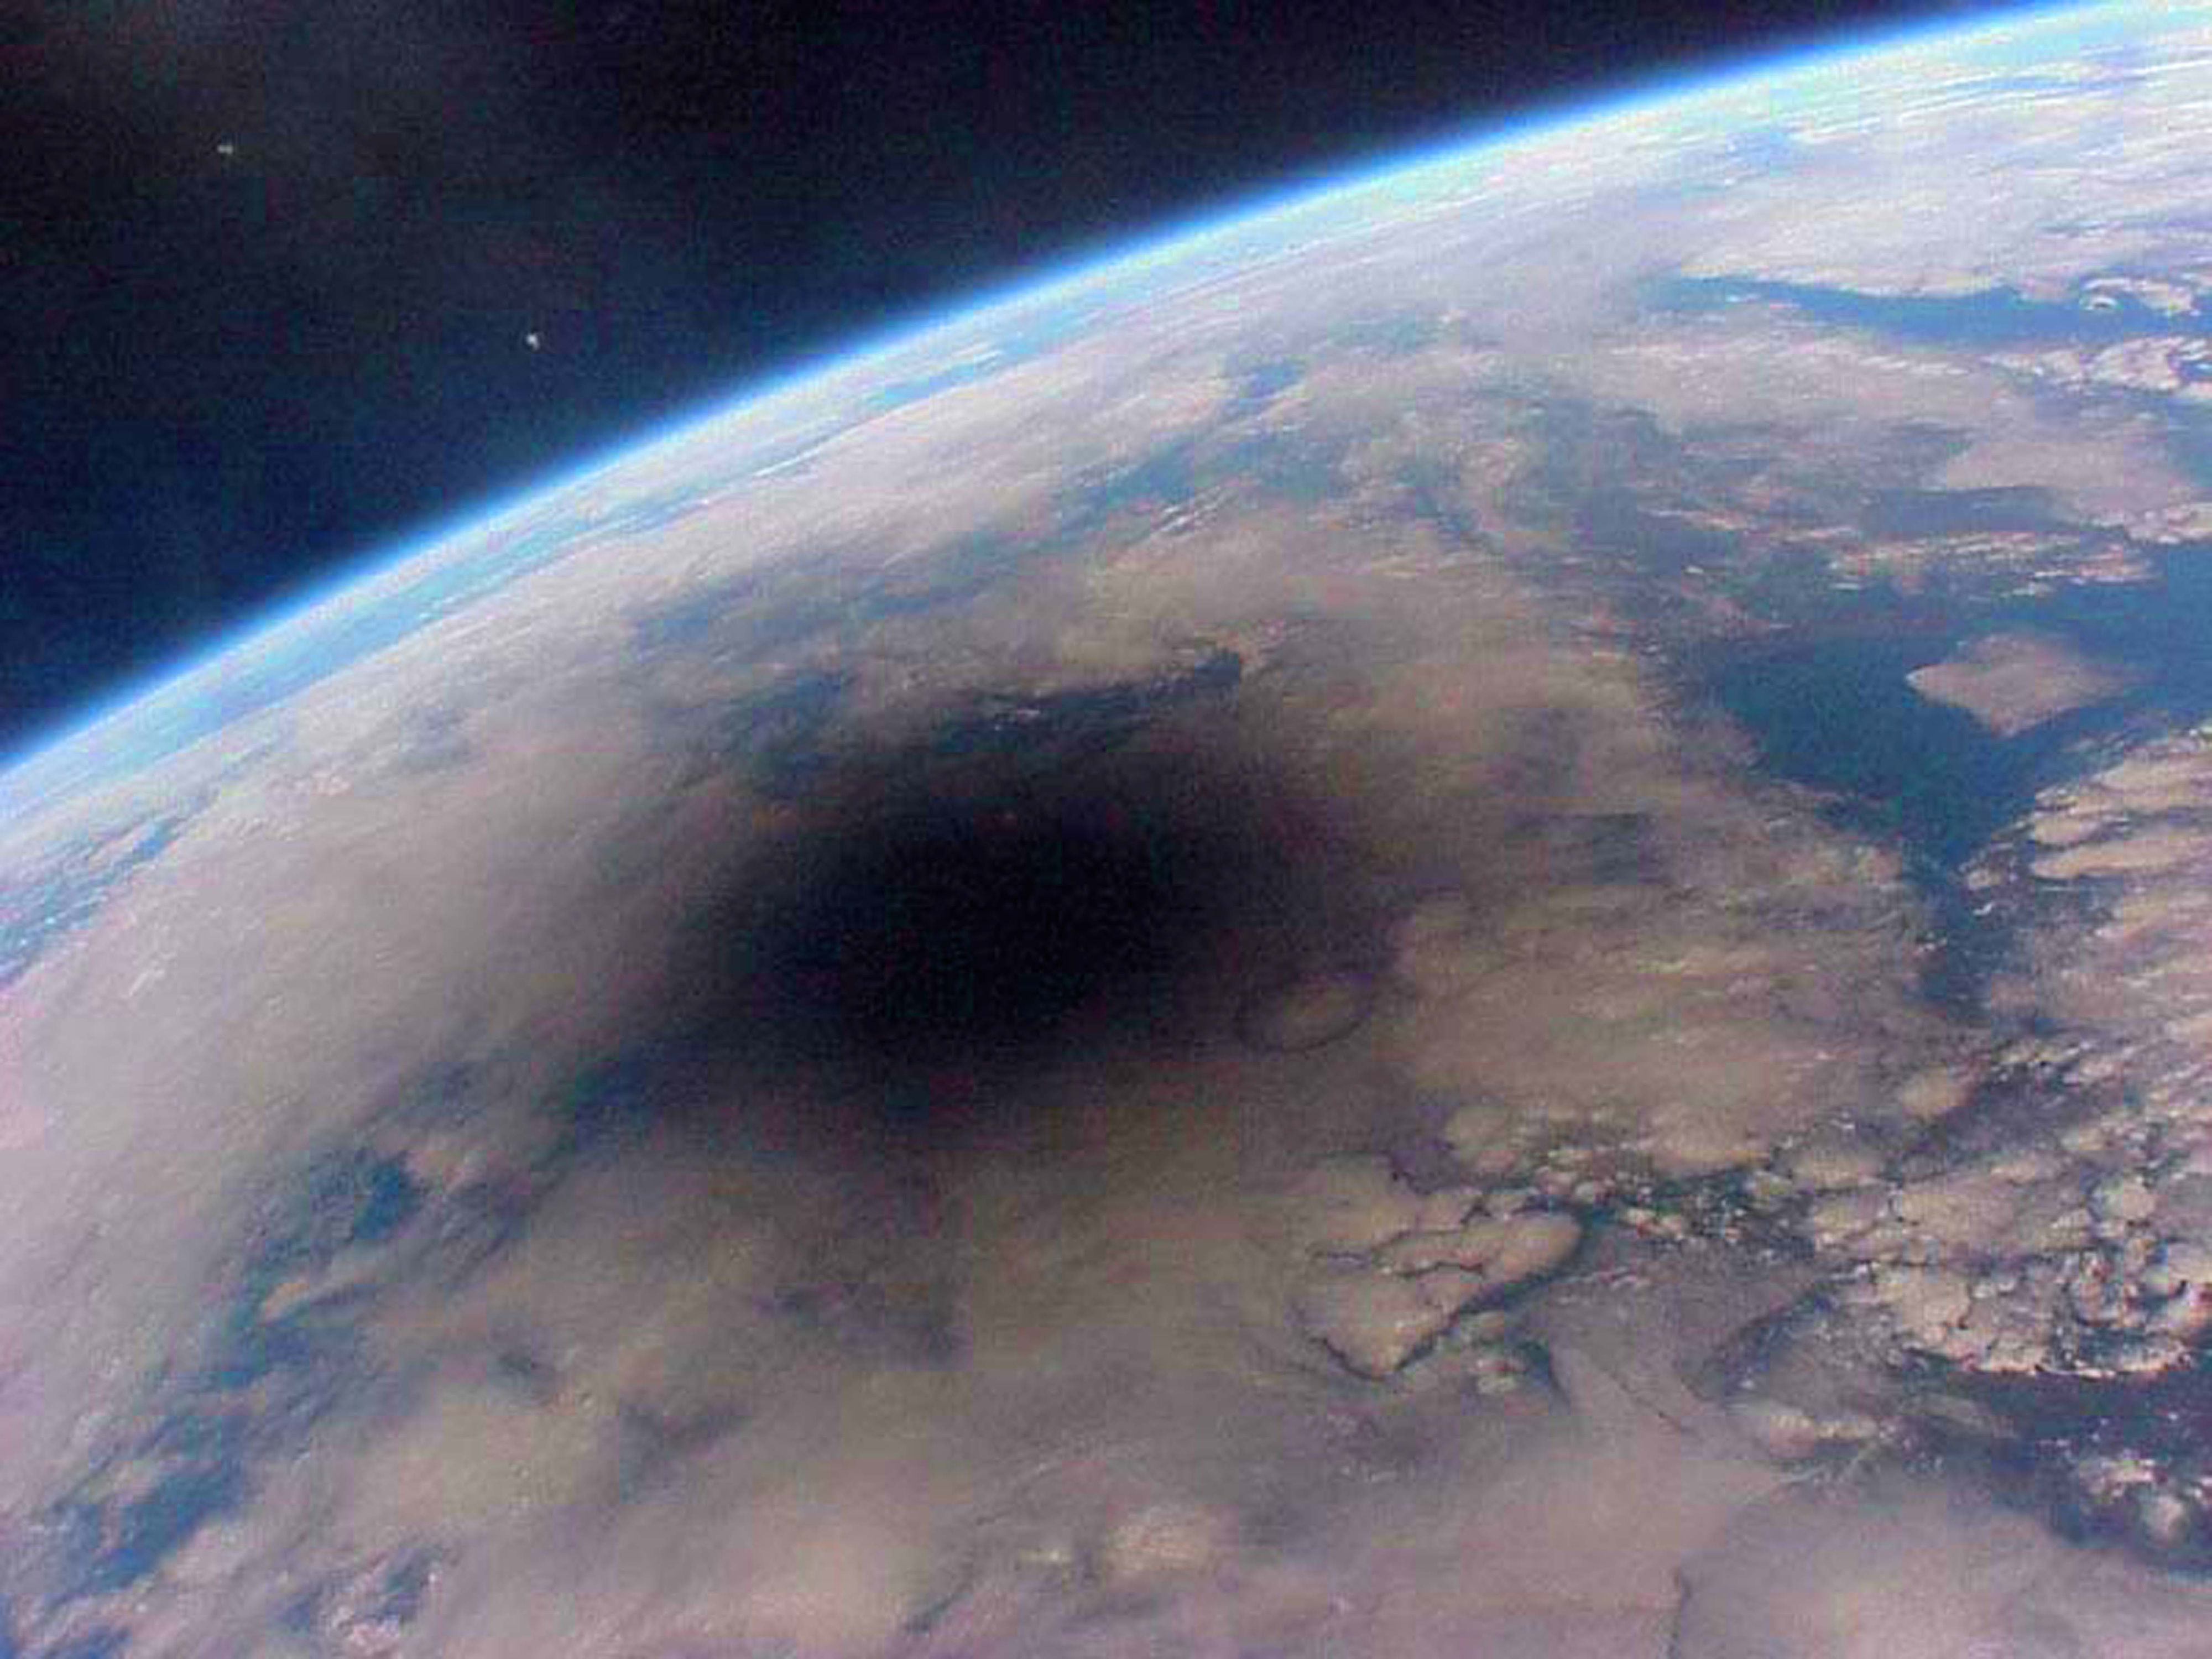 A solar eclipse from space